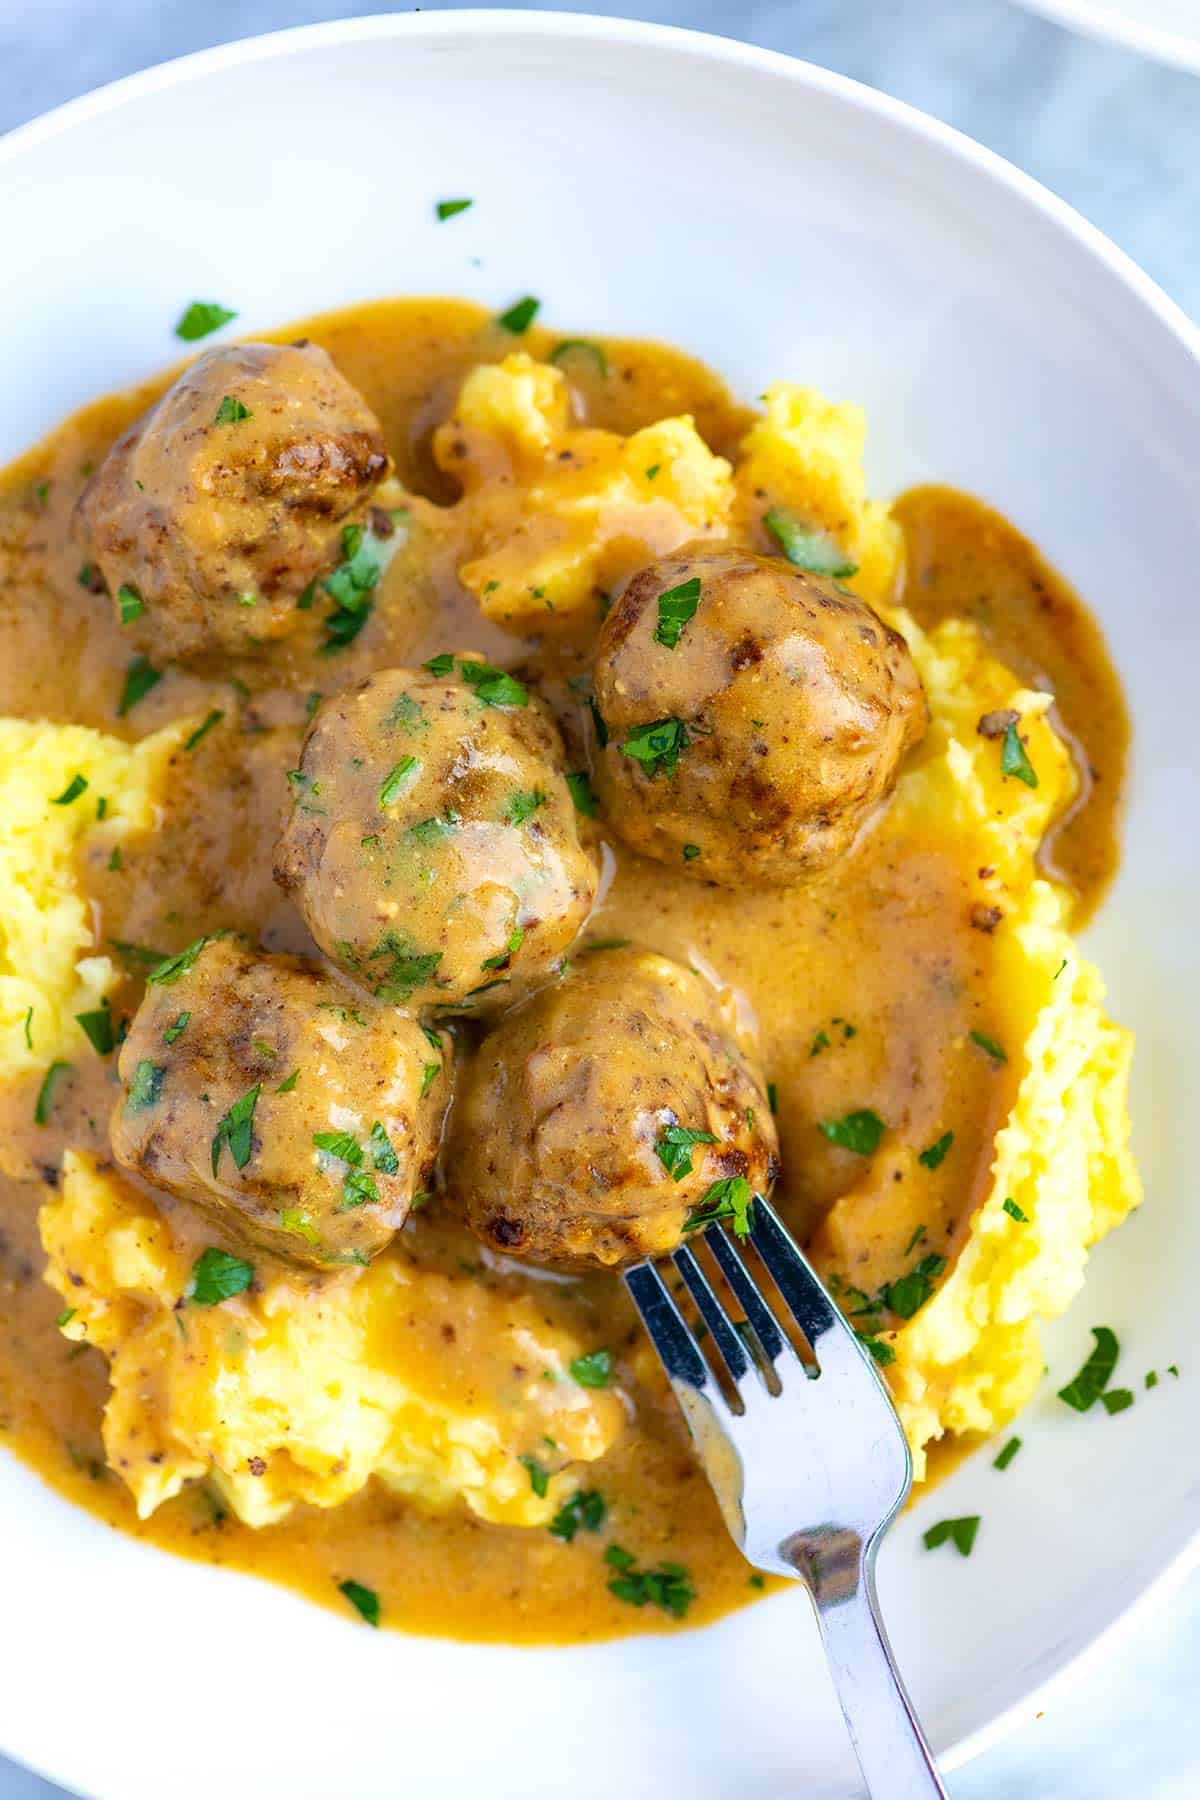 Homemade Swedish meatballs with mashed potatoes and gravy